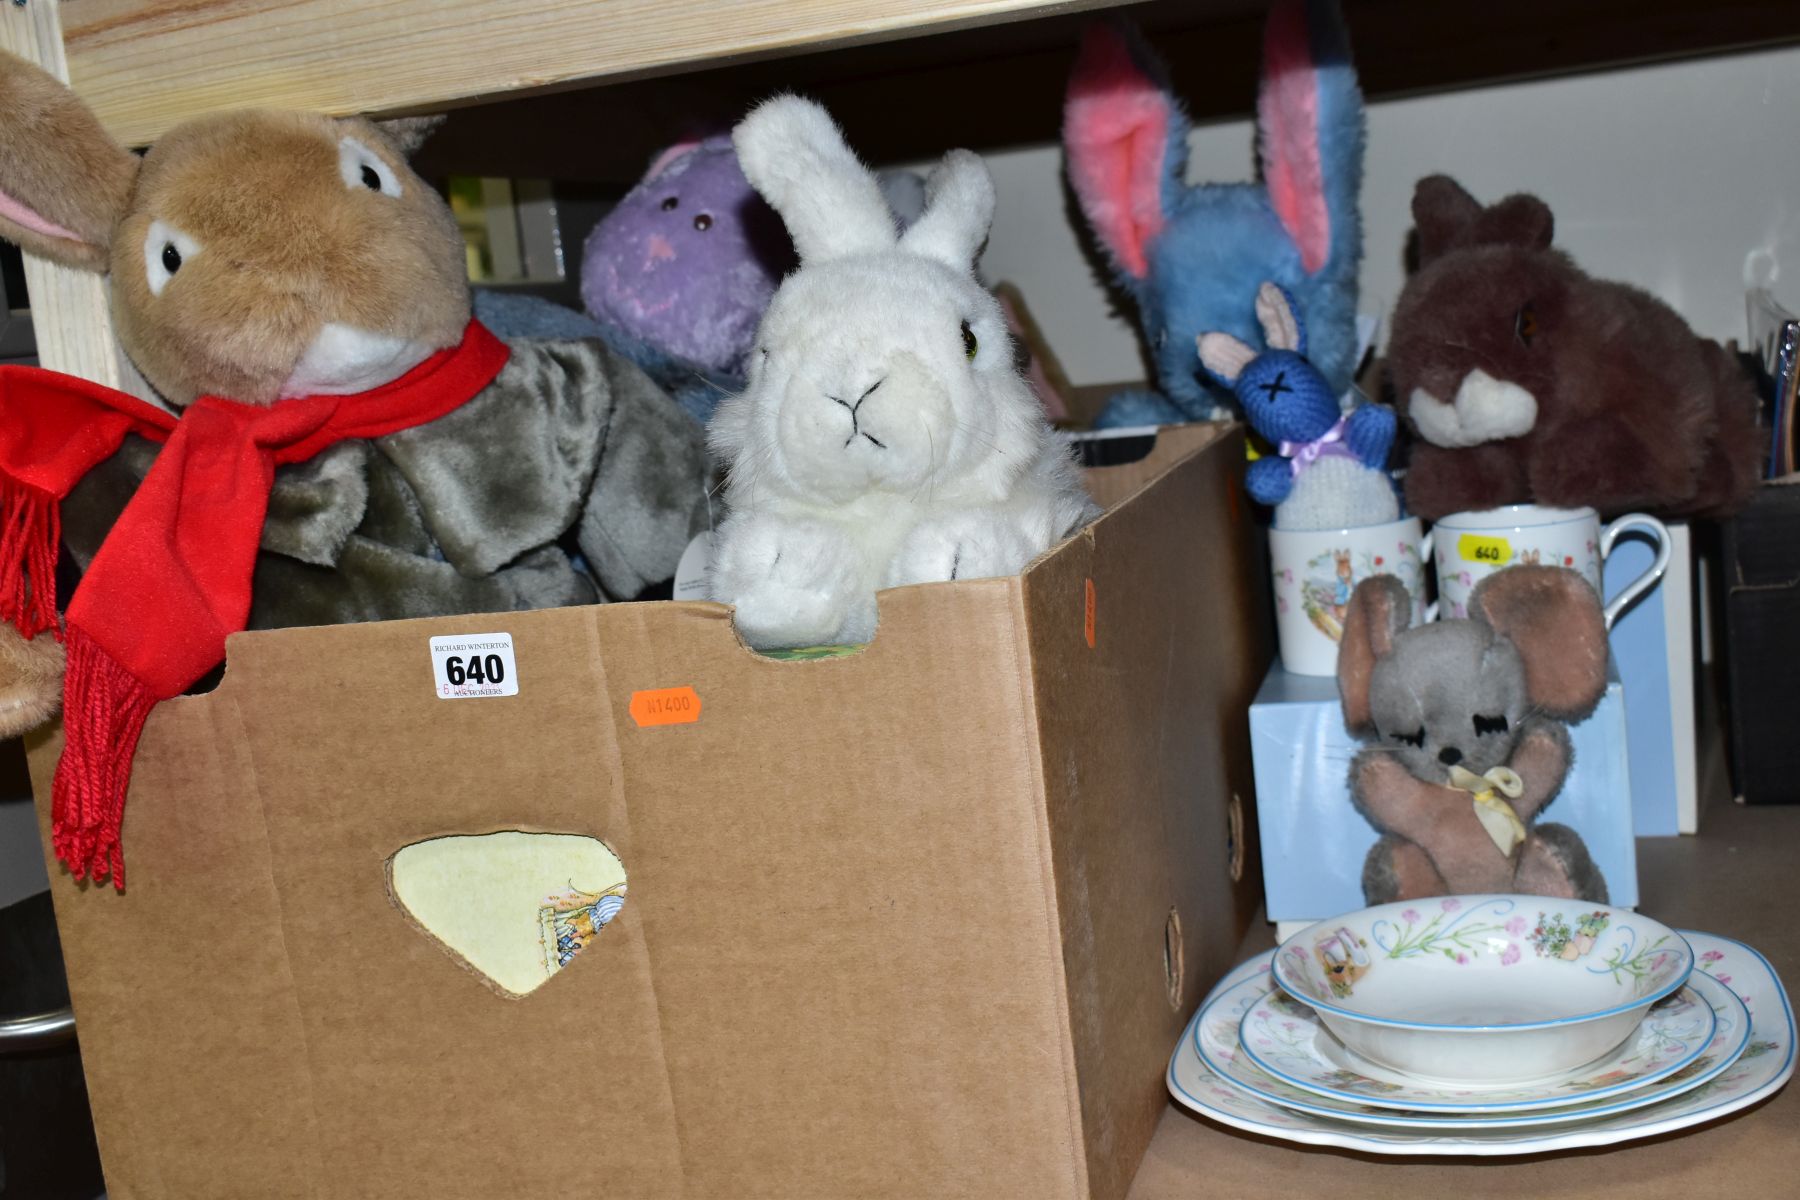 TWO BOXES AND LOOSE BEATRIX POTTER'S PETER RABBIT CERAMICS, SOFT TOYS, VHS CASSETTES, BOOKS, OTHER